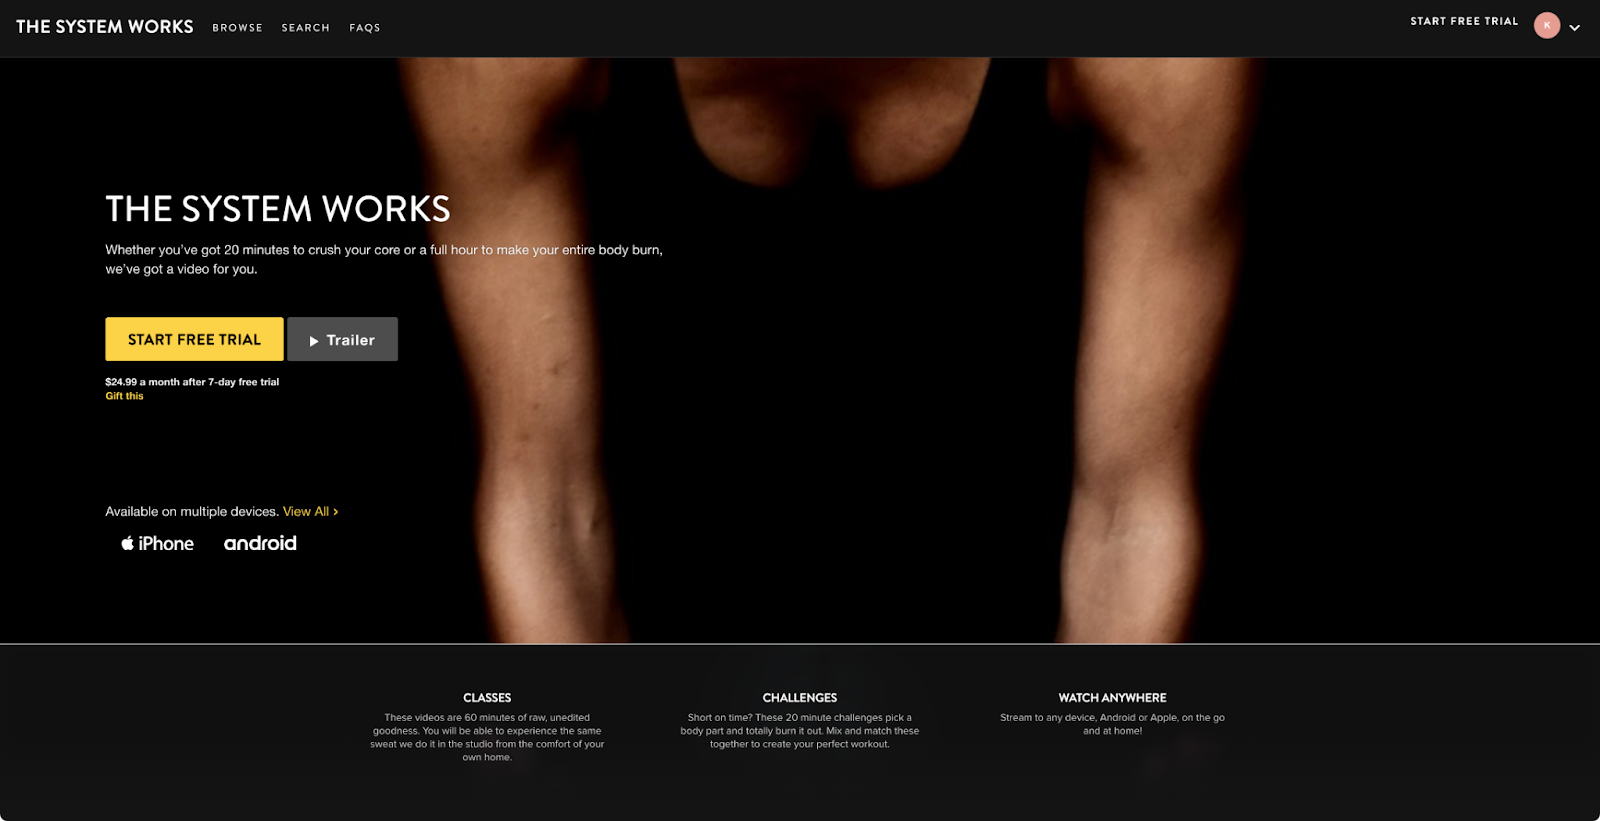 System of Strength homepage.